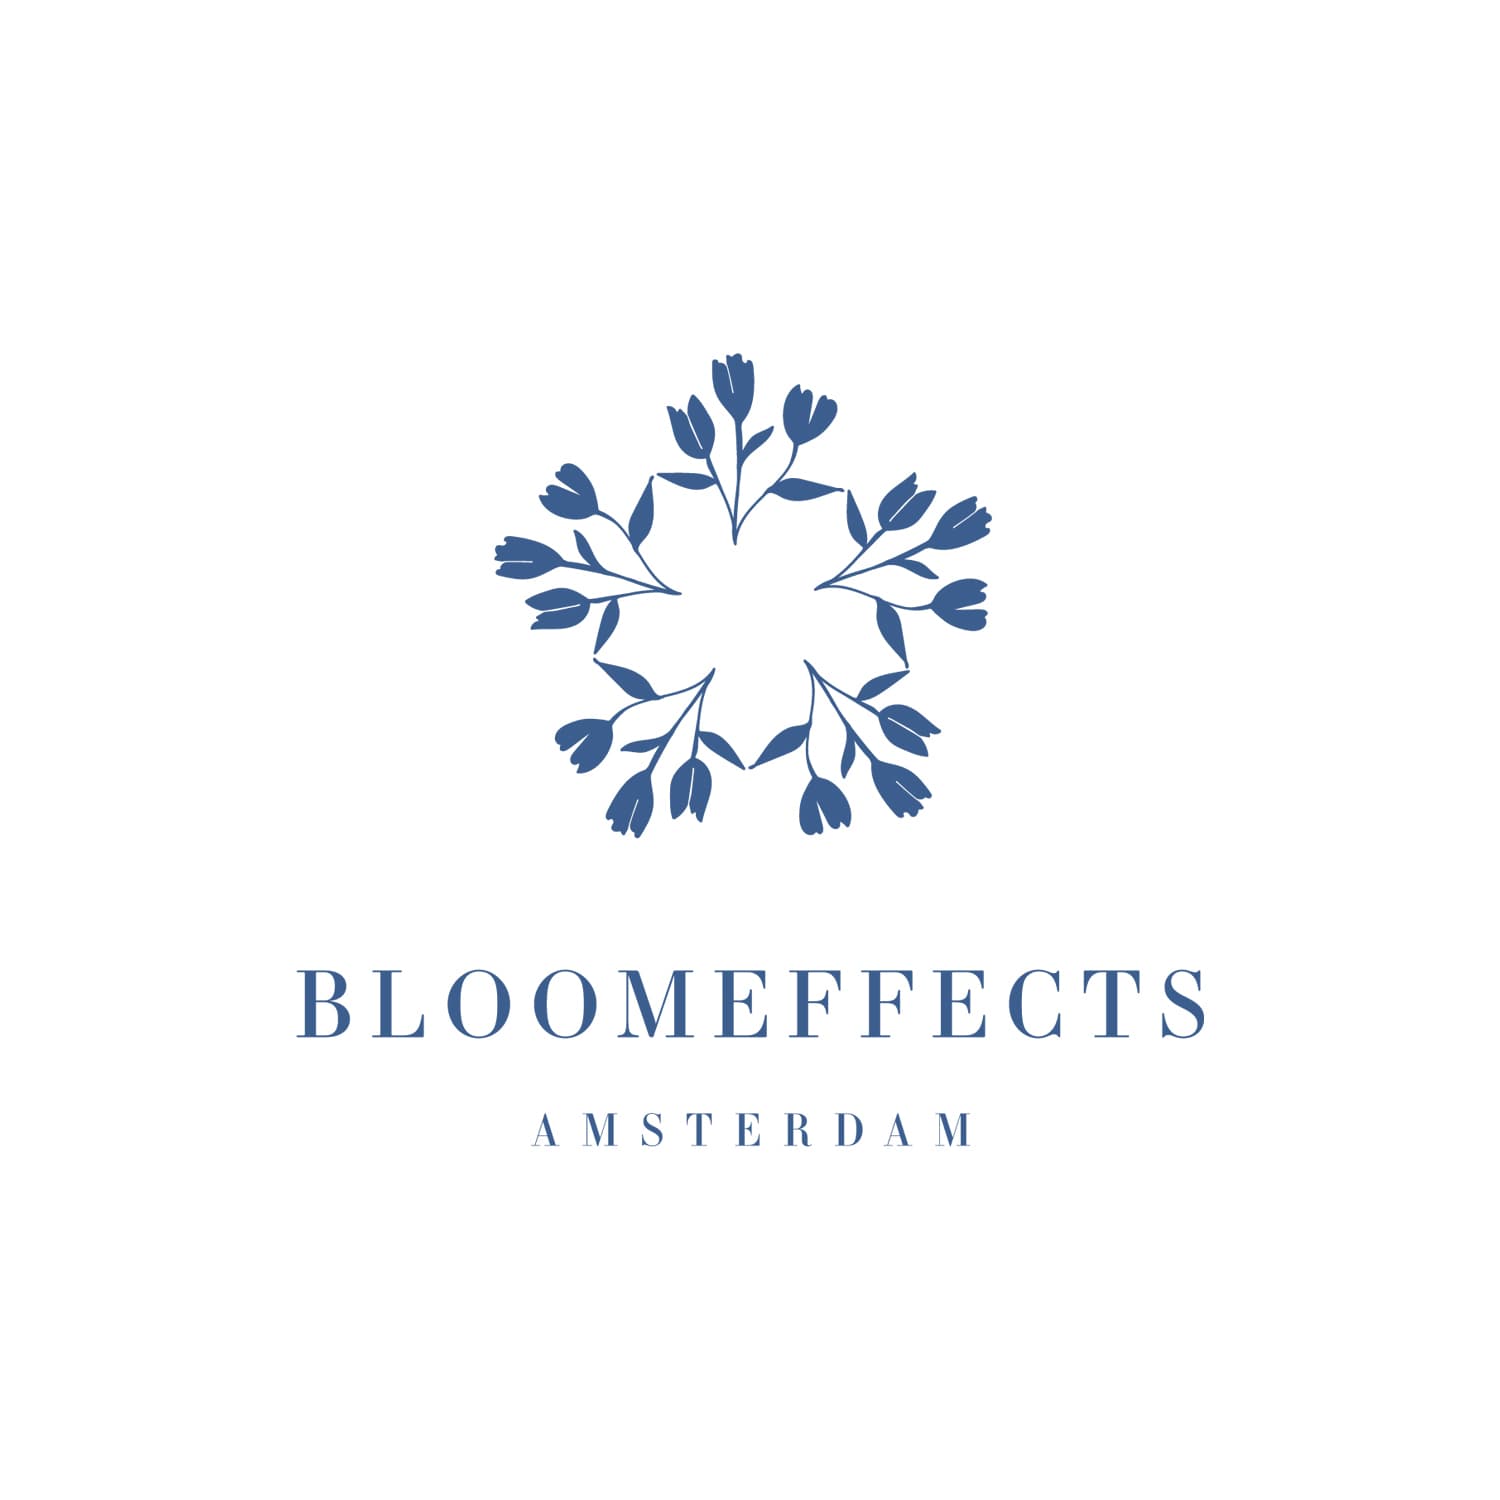 BLOOMEFFECTS